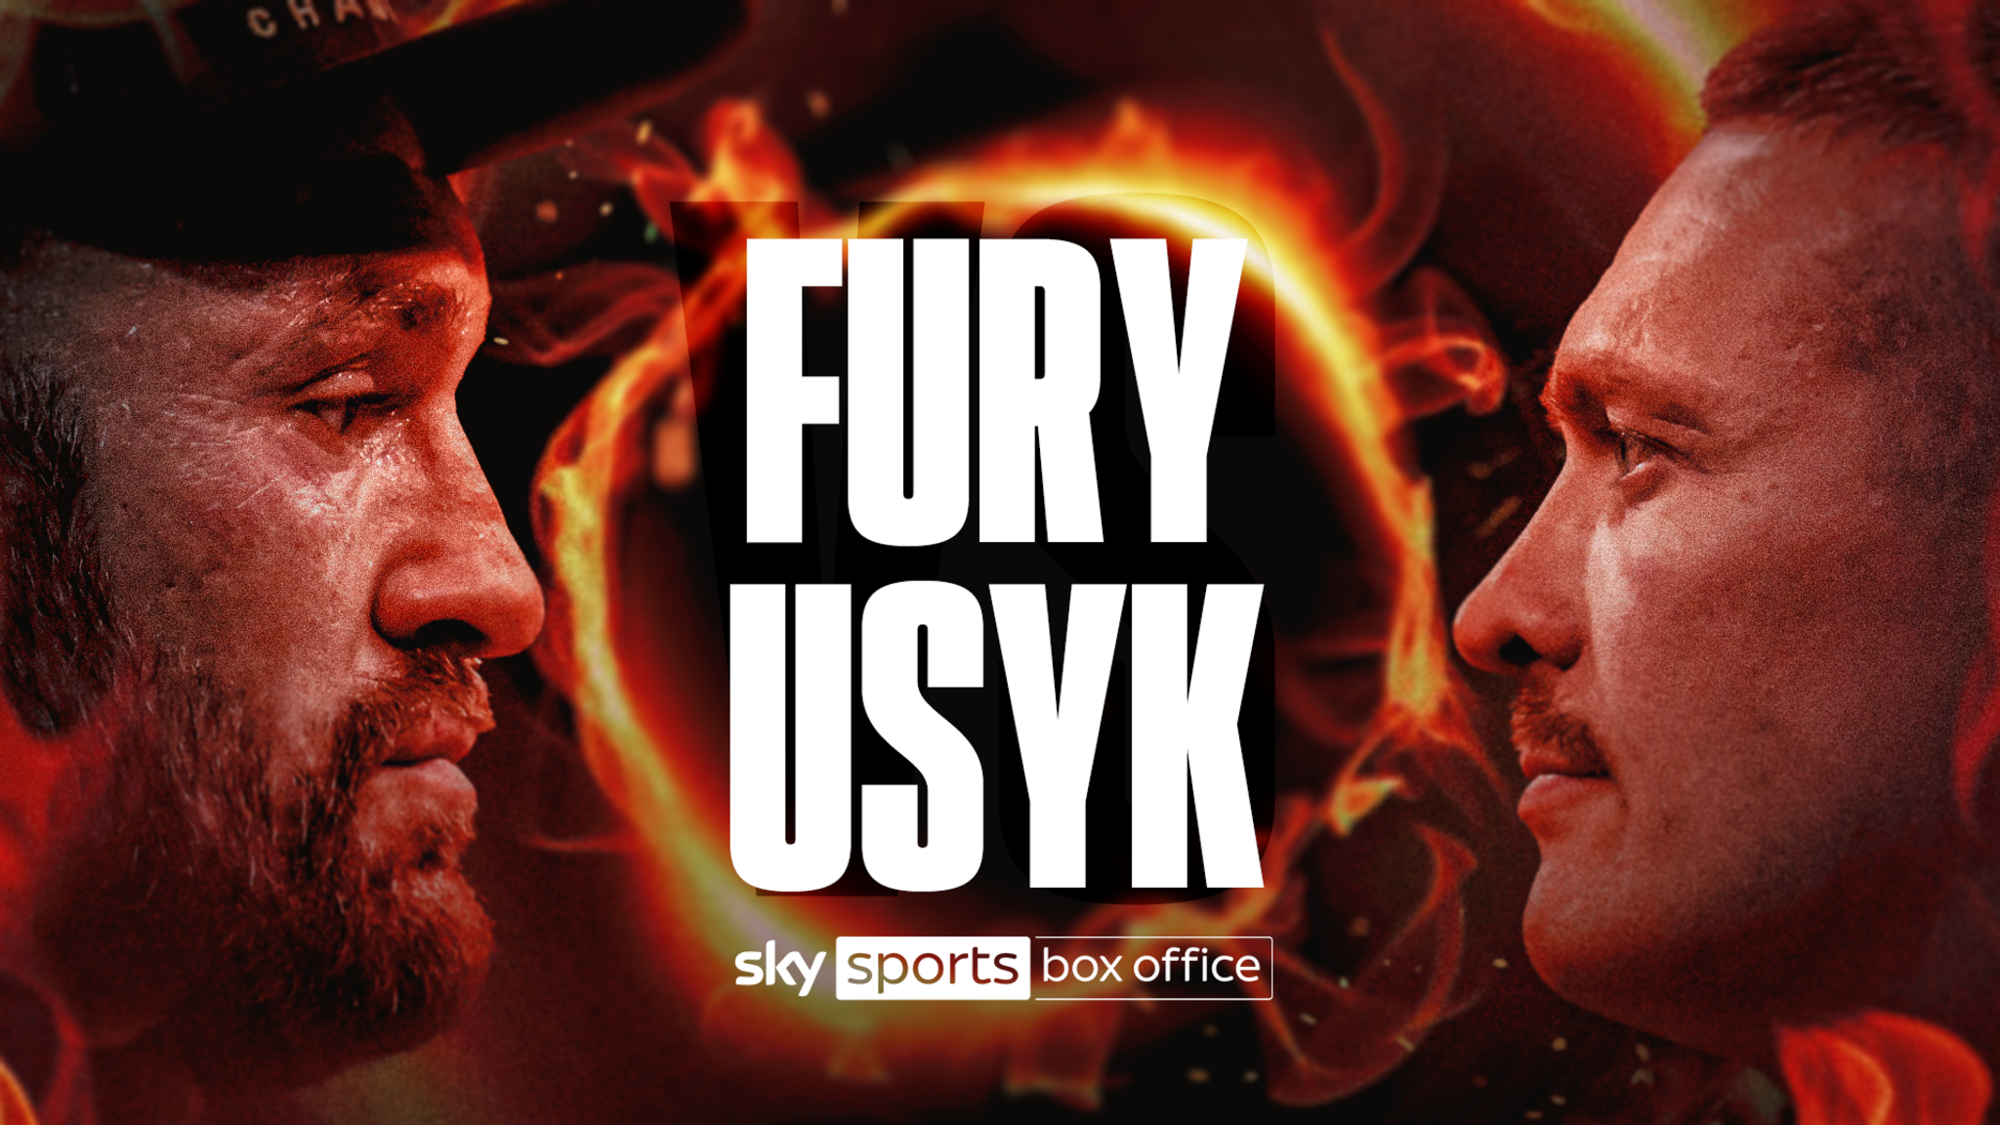 Where to watch Usyk - Fury. What TV channels will show the fight on May 18. How much does it cost to watch